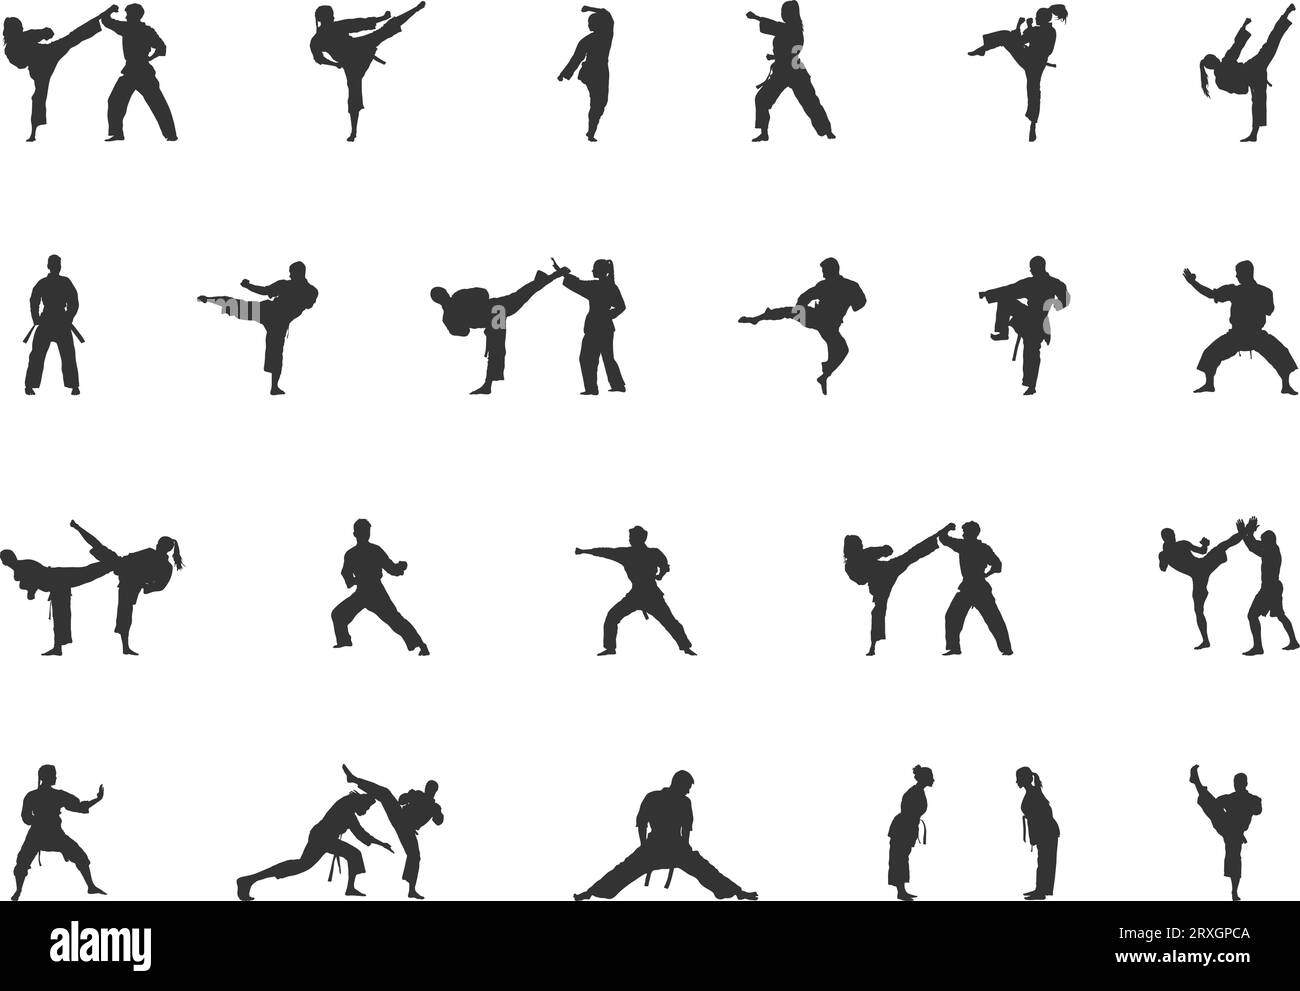 Kung Fu Pose: Over 3,276 Royalty-Free Licensable Stock Vectors & Vector Art  | Shutterstock